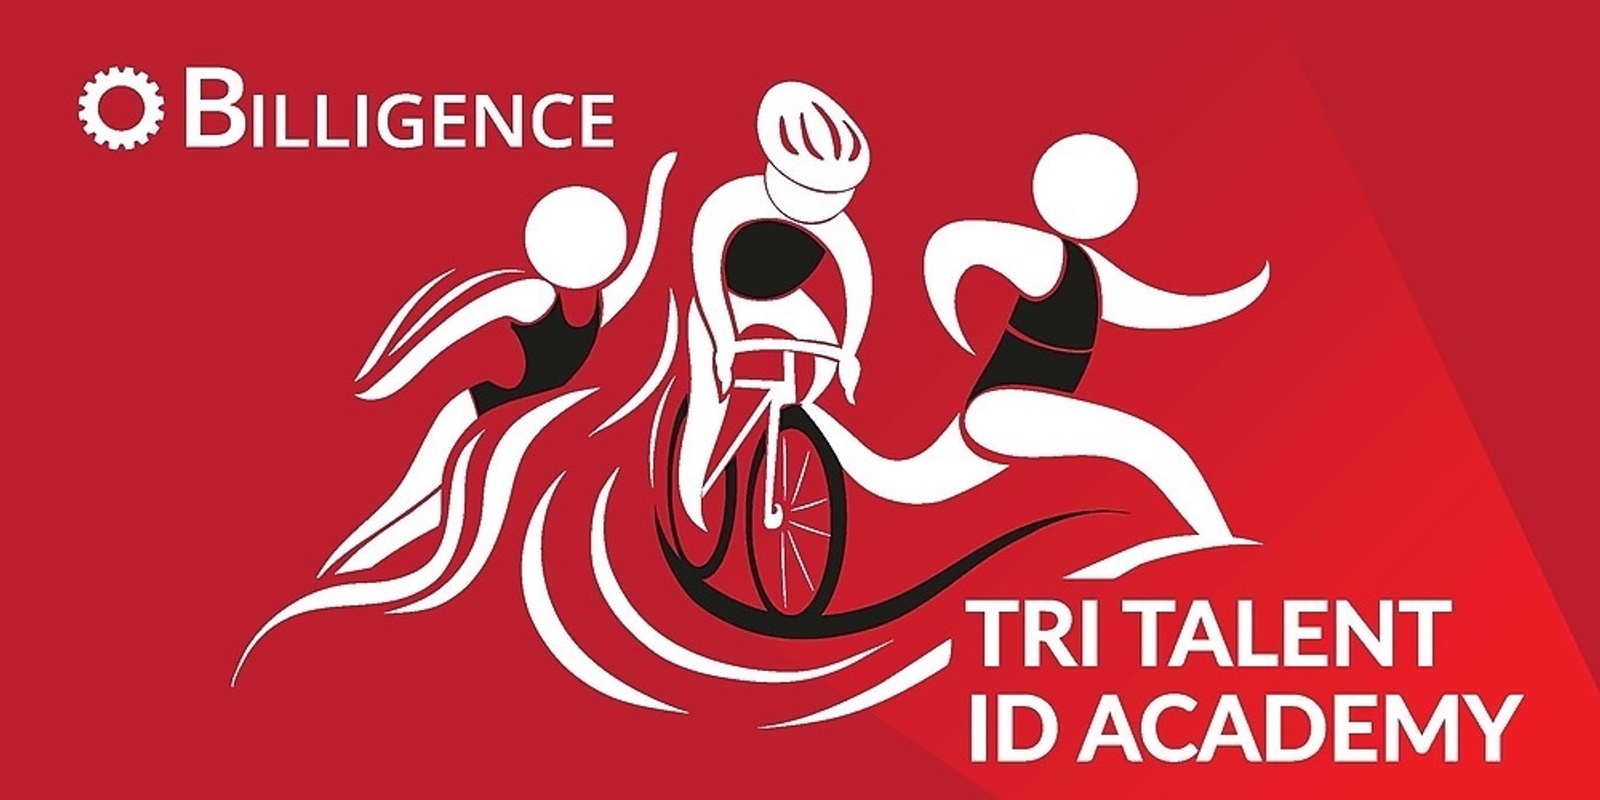 Banner image for Billigence Talent ID Academy Tri Event